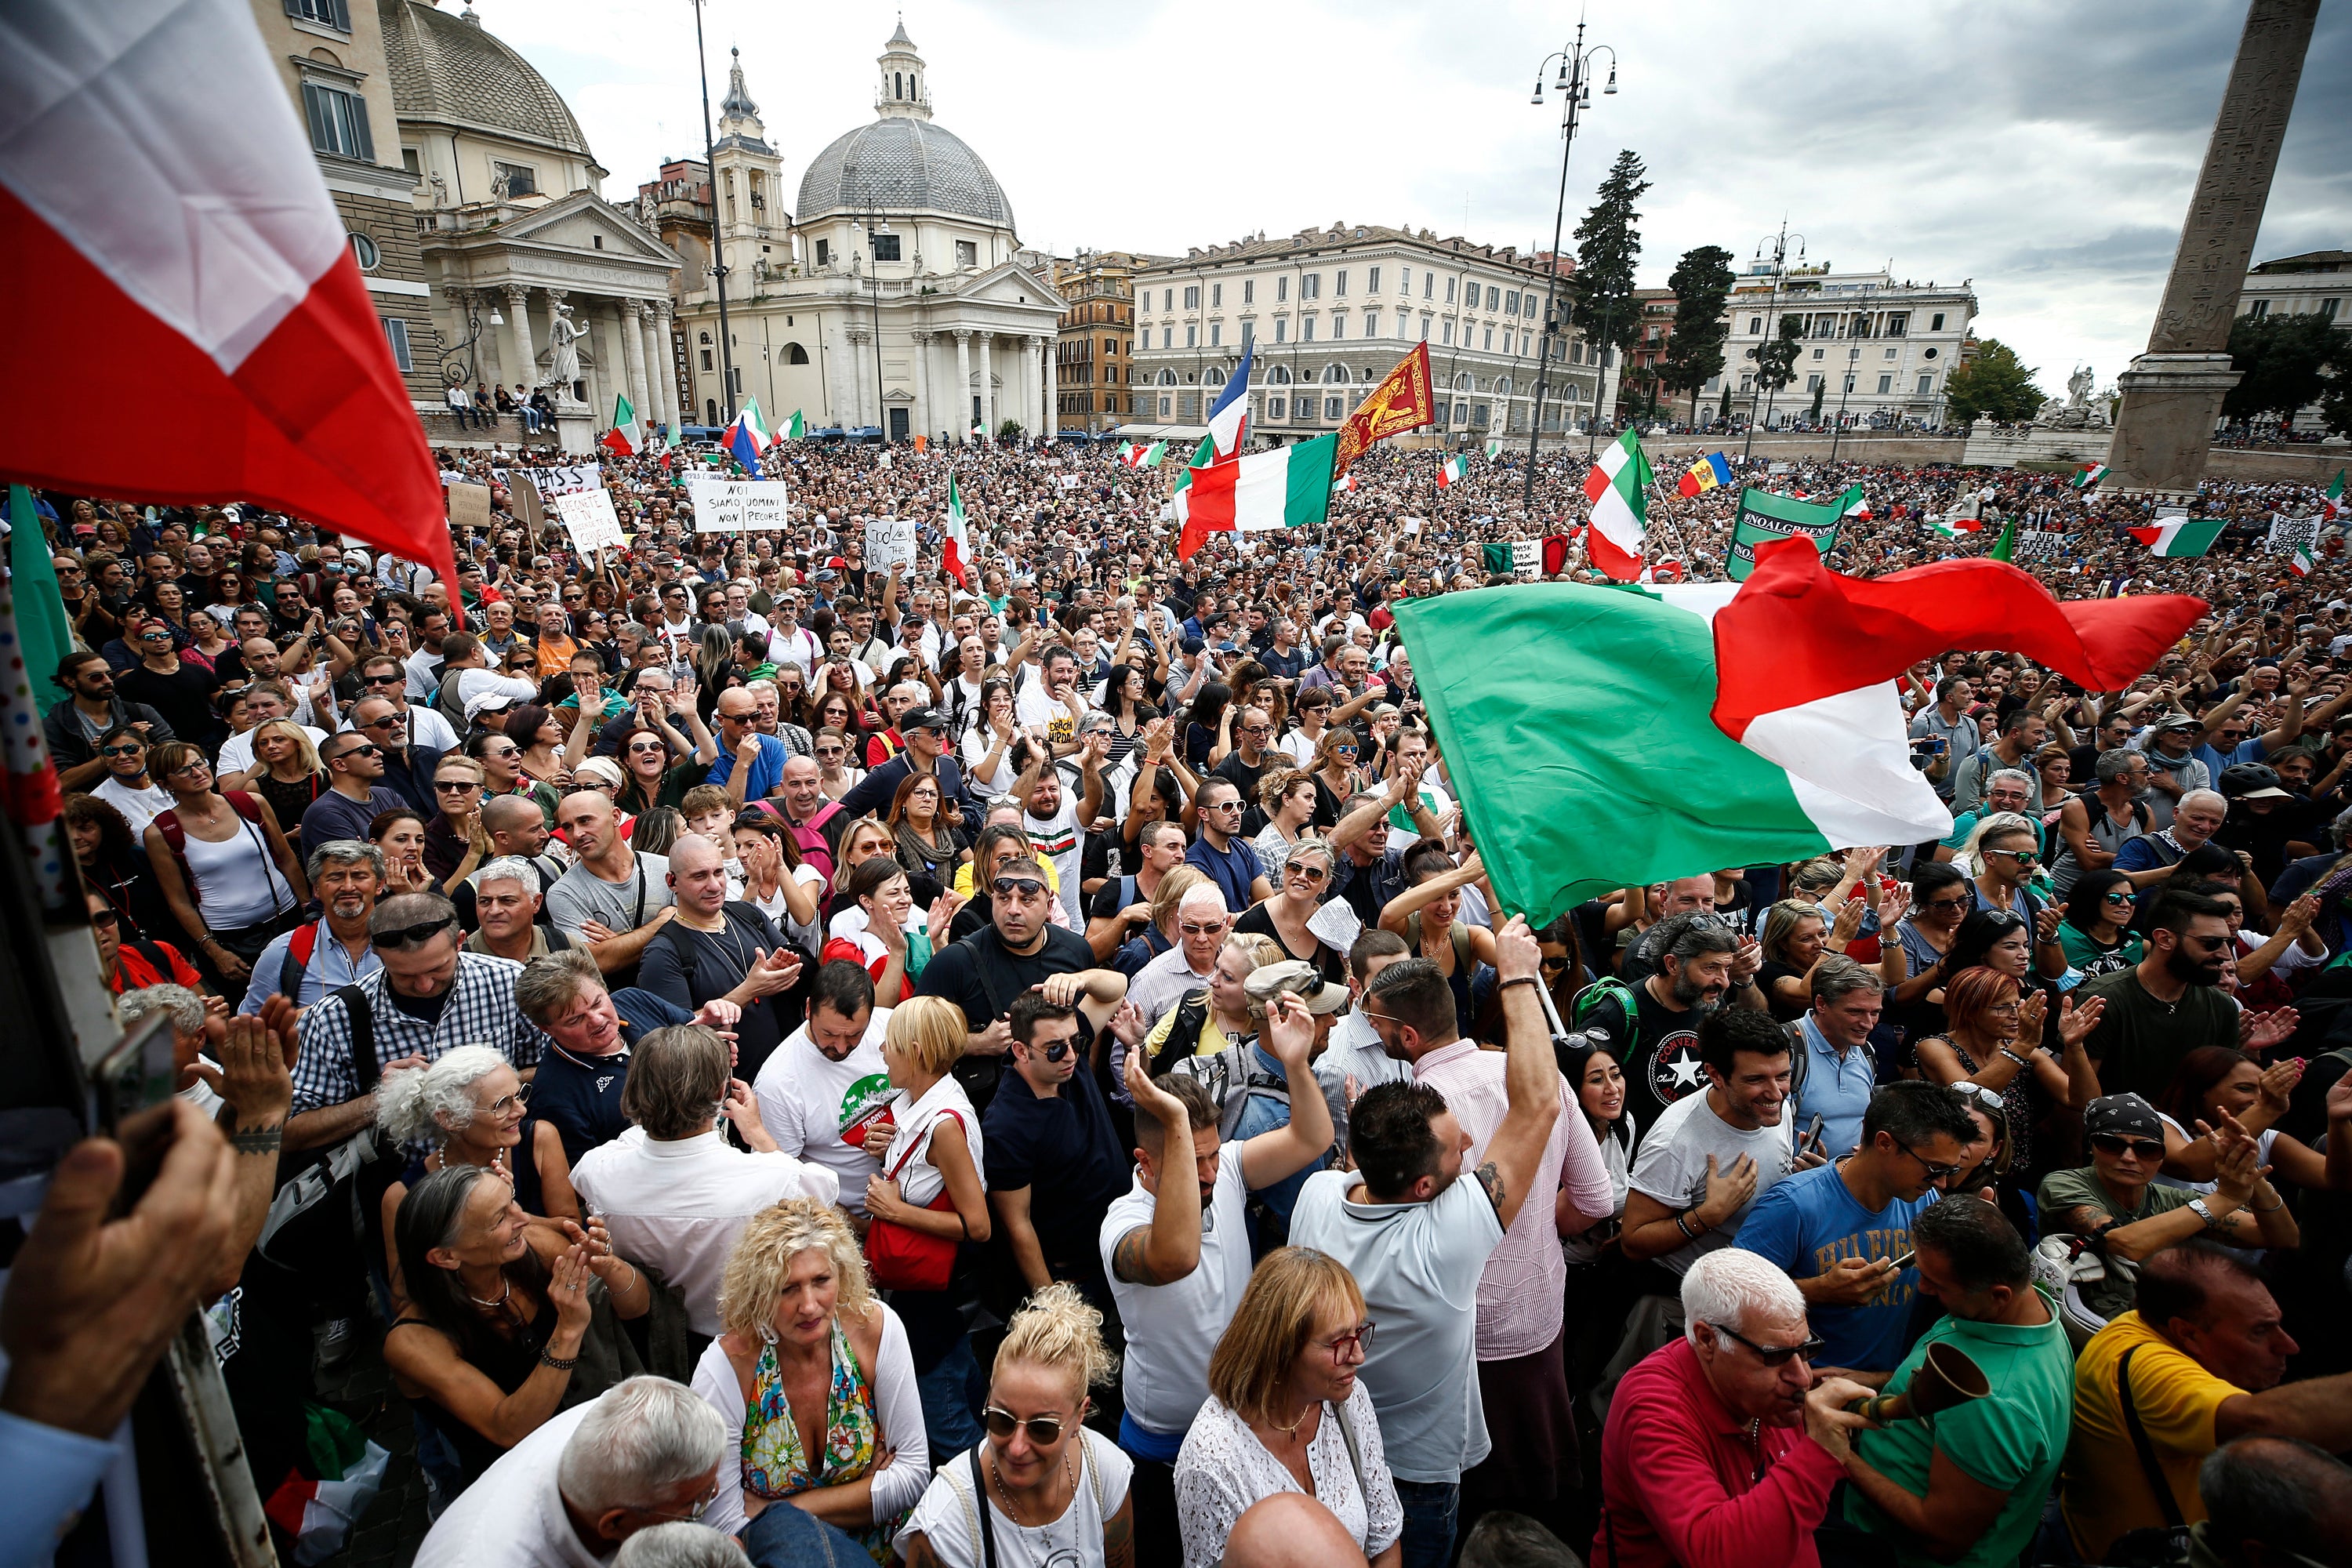 Thousands march in Rome to protest workplace vaccine rule | The Independent